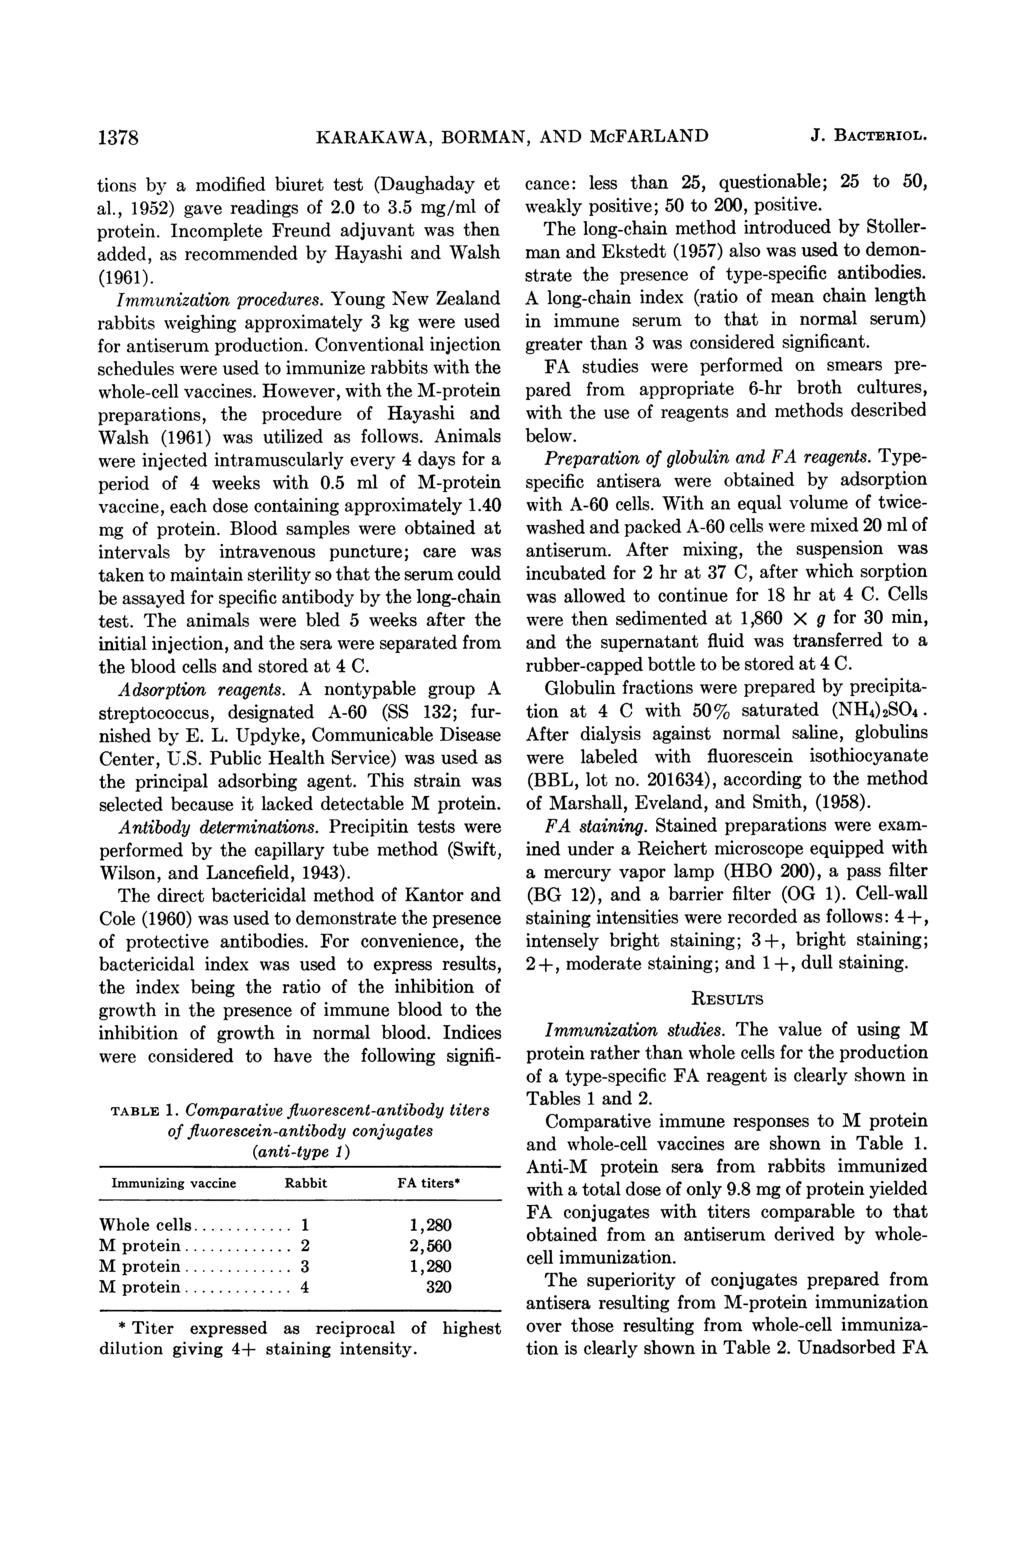 1378 tions by a modified biuret test (Daughaday et al., 1952) gave readings of 2.0 to 3.5 mg/ml of protein. Incomplete Freund adjuvant was then added, as recommended by Hayashi and Walsh (1961).